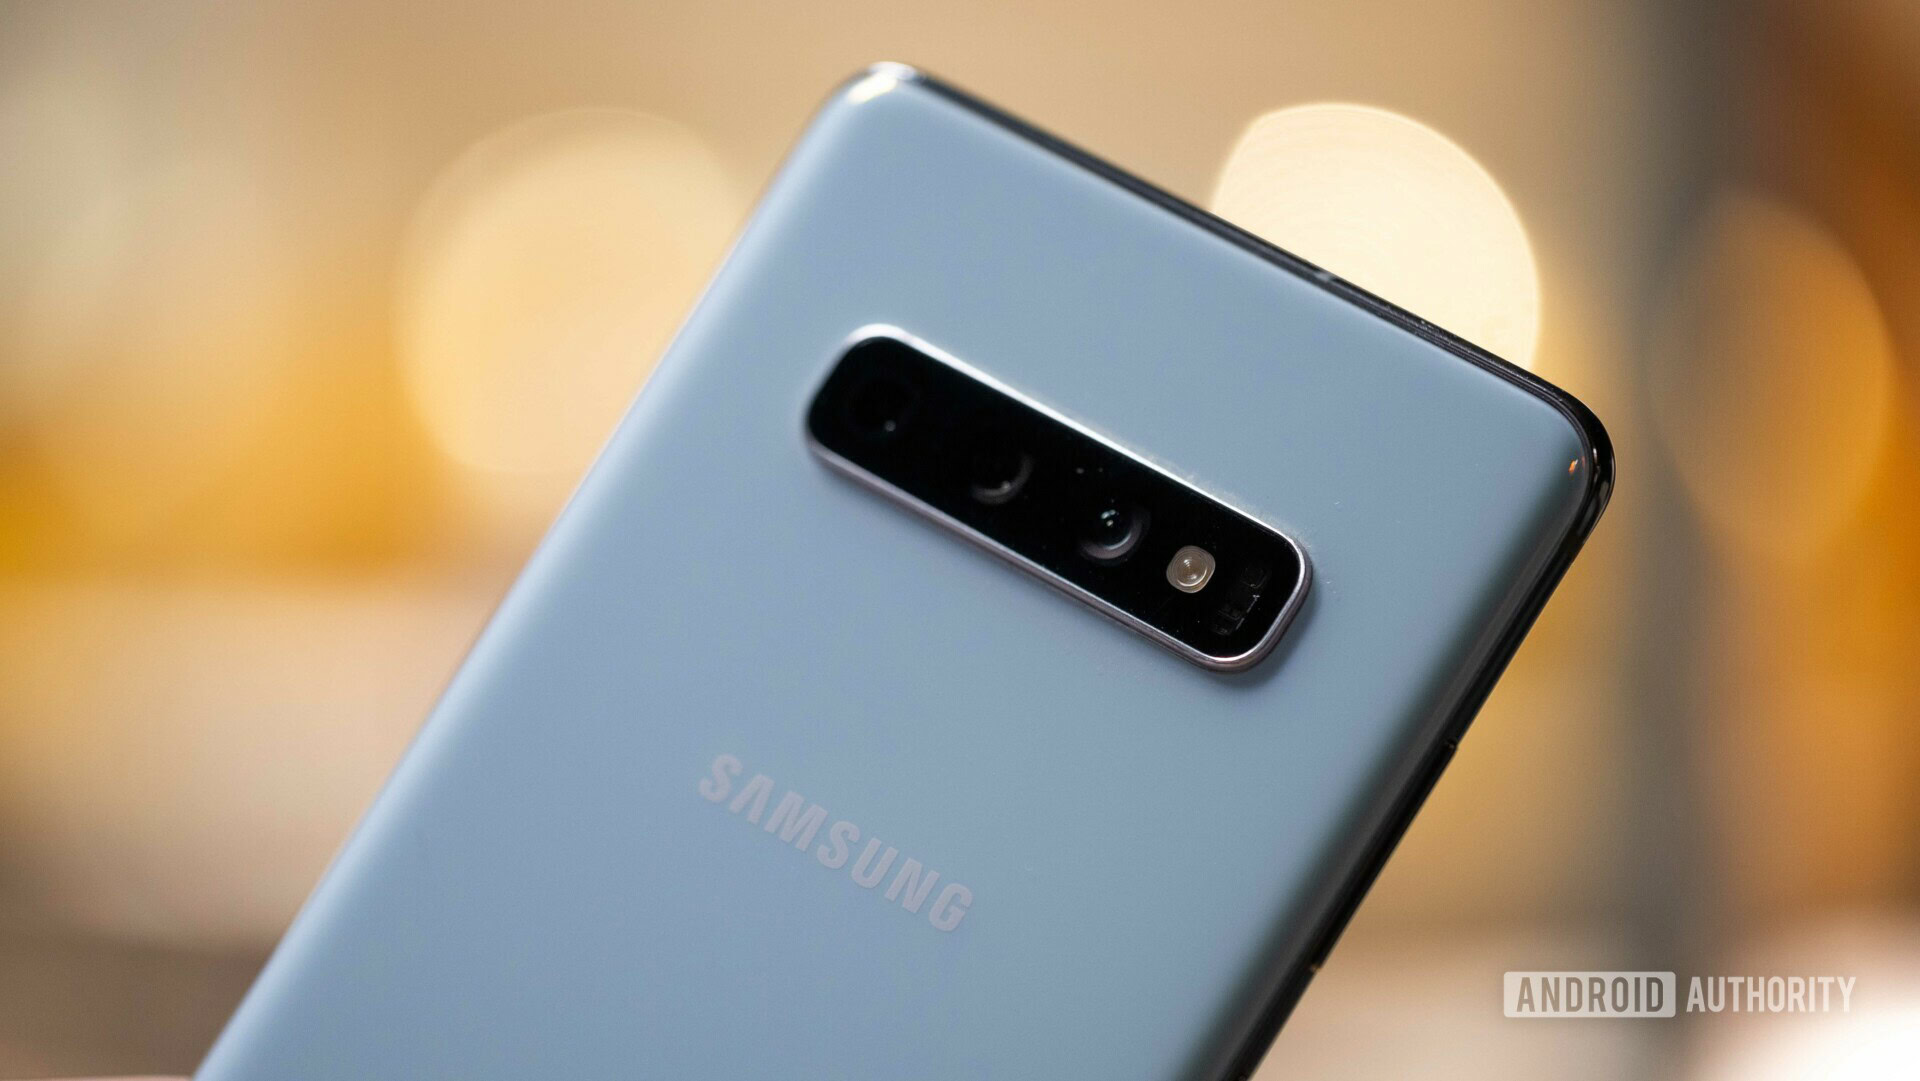 Samsung Galaxy S10+ review: a flagship with (few) compromises